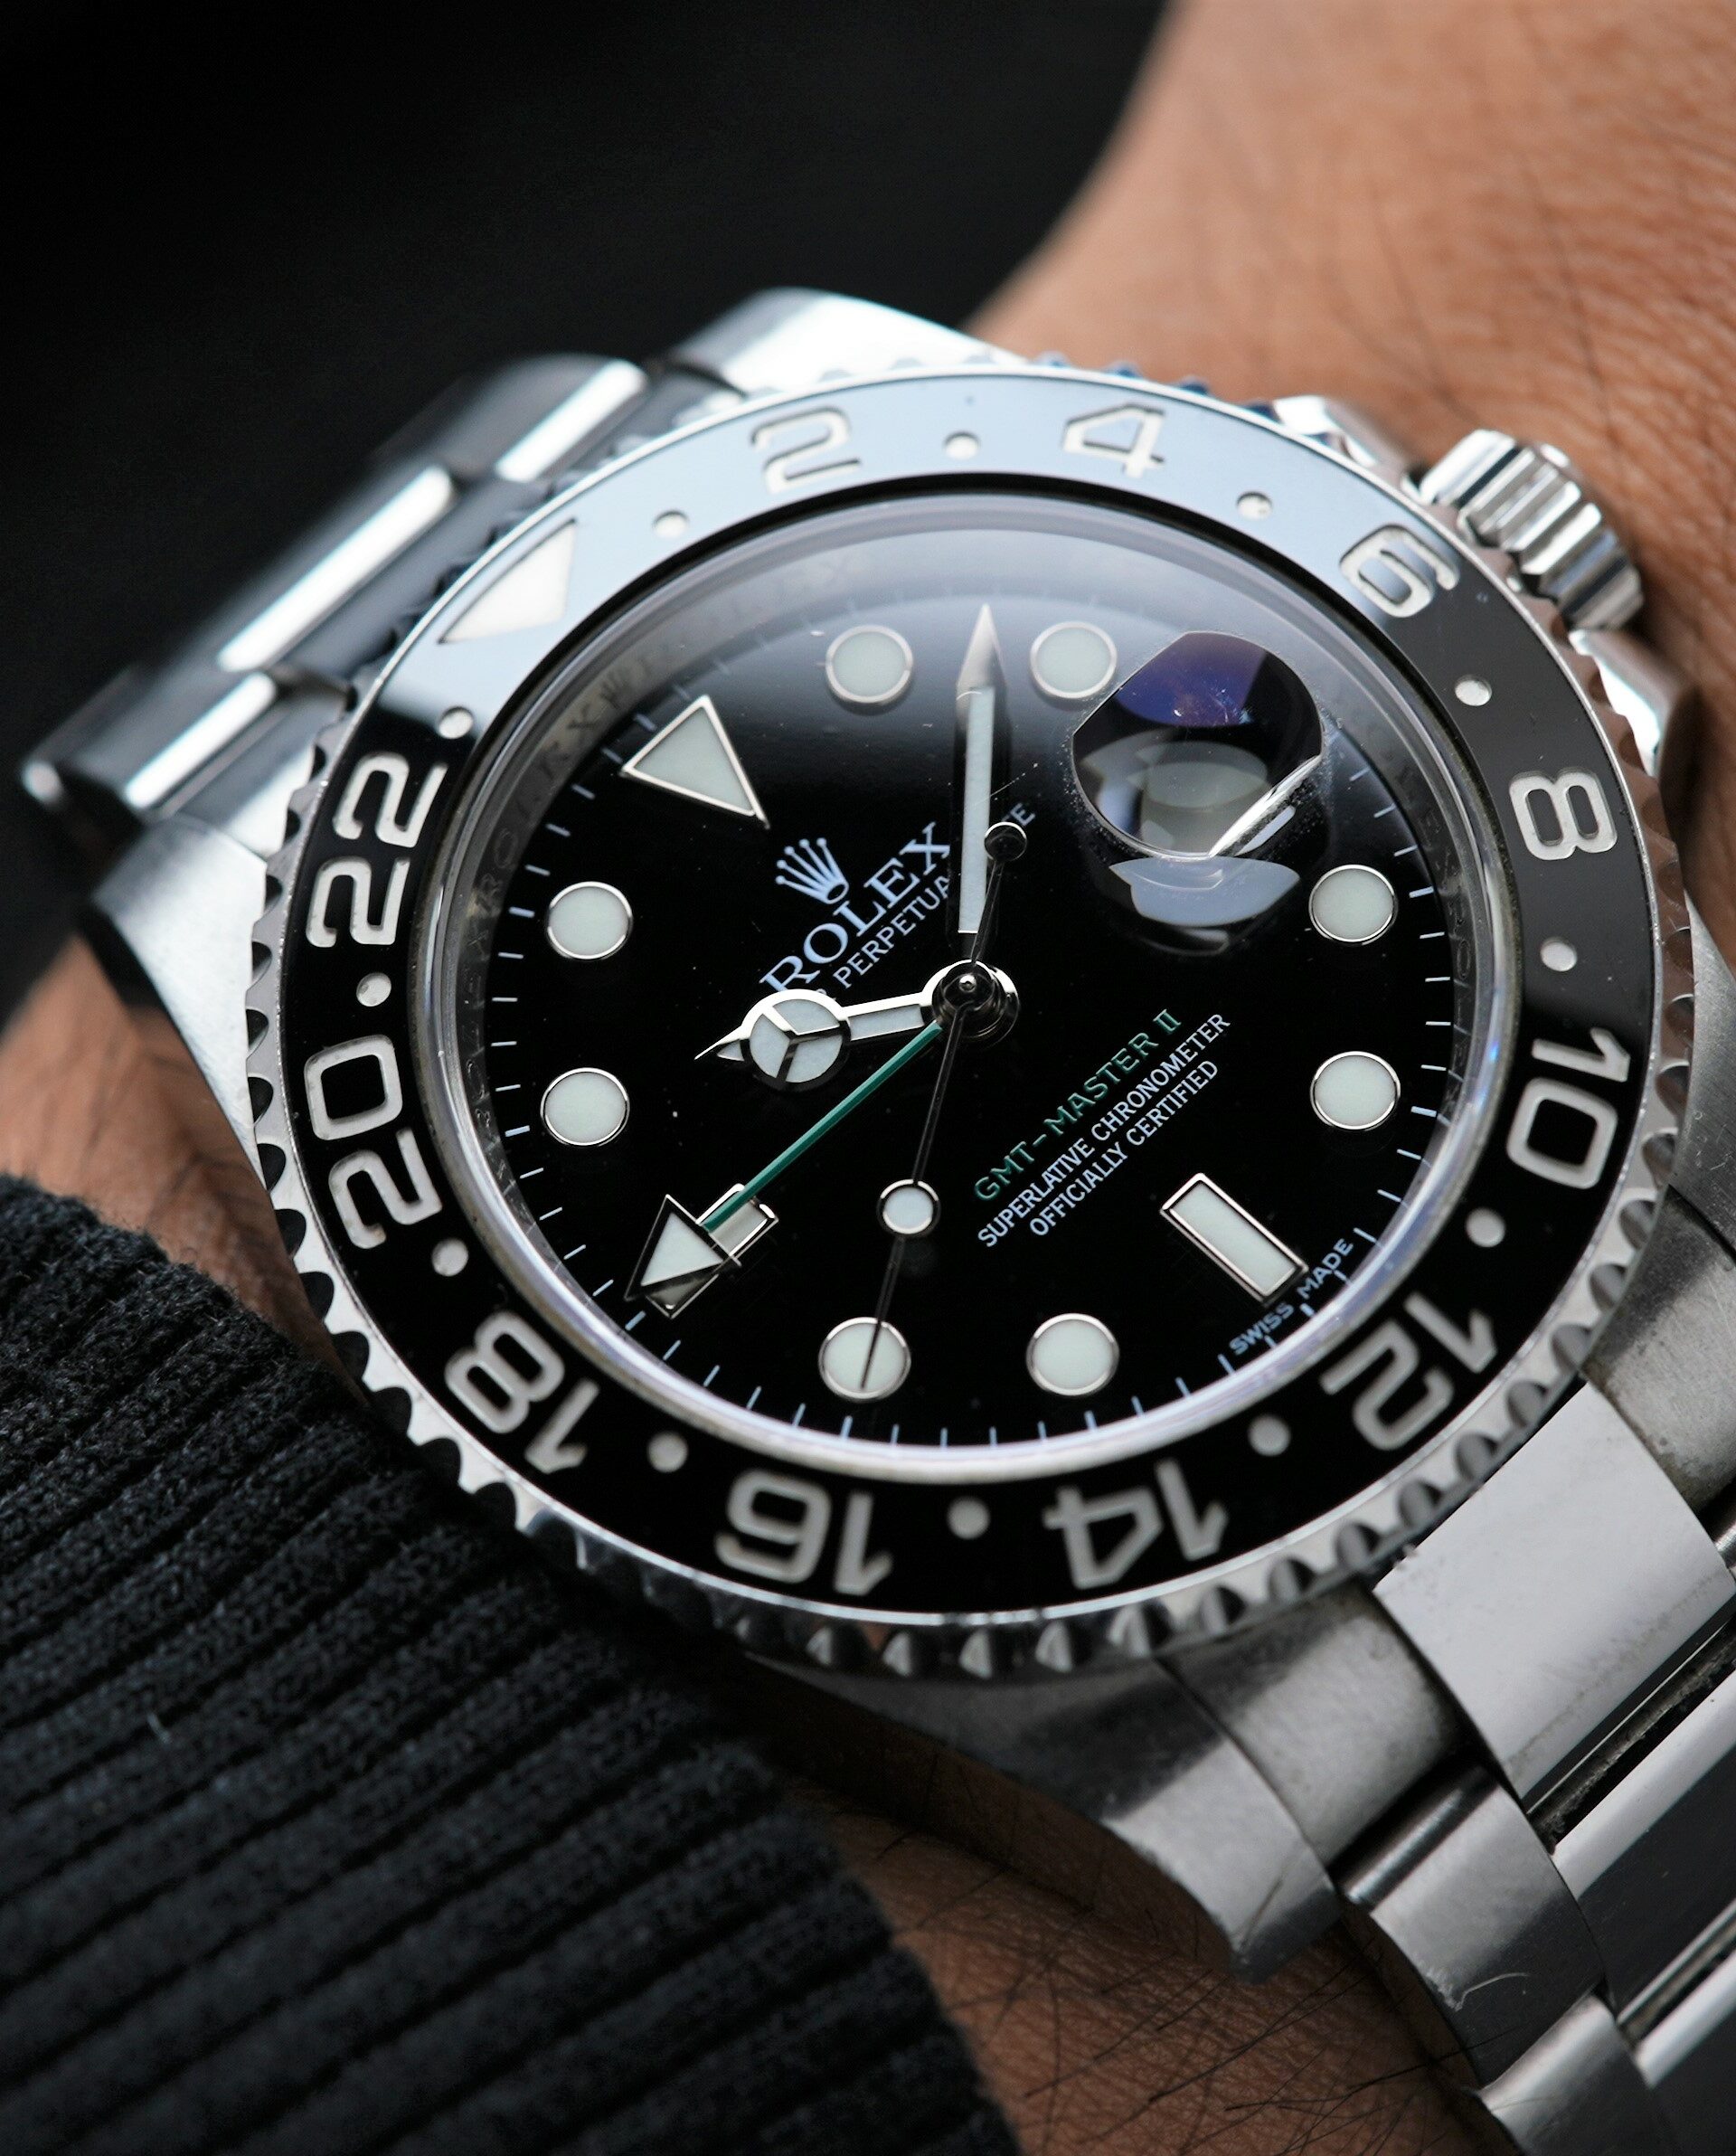 Rolex GMT-Master II Black Discontinued 116710LN wristwatch featured on the wrist.